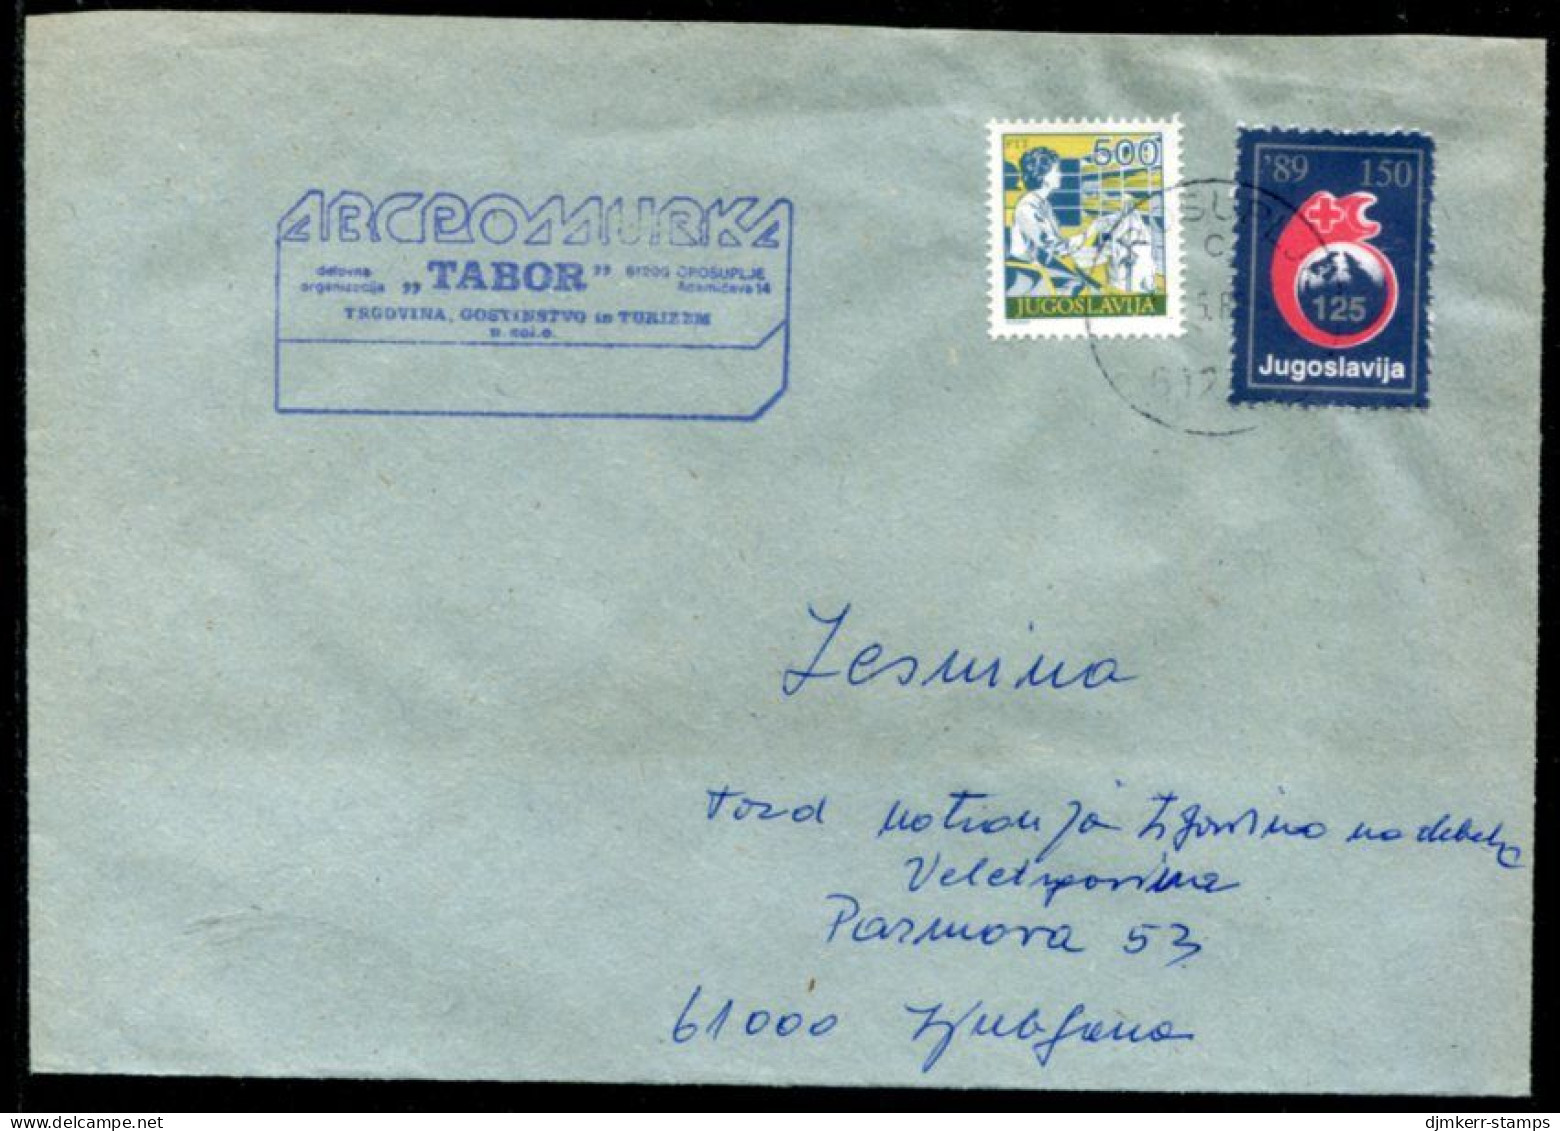 YUGOSLAVIA 1989 Commercial Cover With Red Cross Week 150 D Tax.  Michel ZZM 169 - Charity Issues